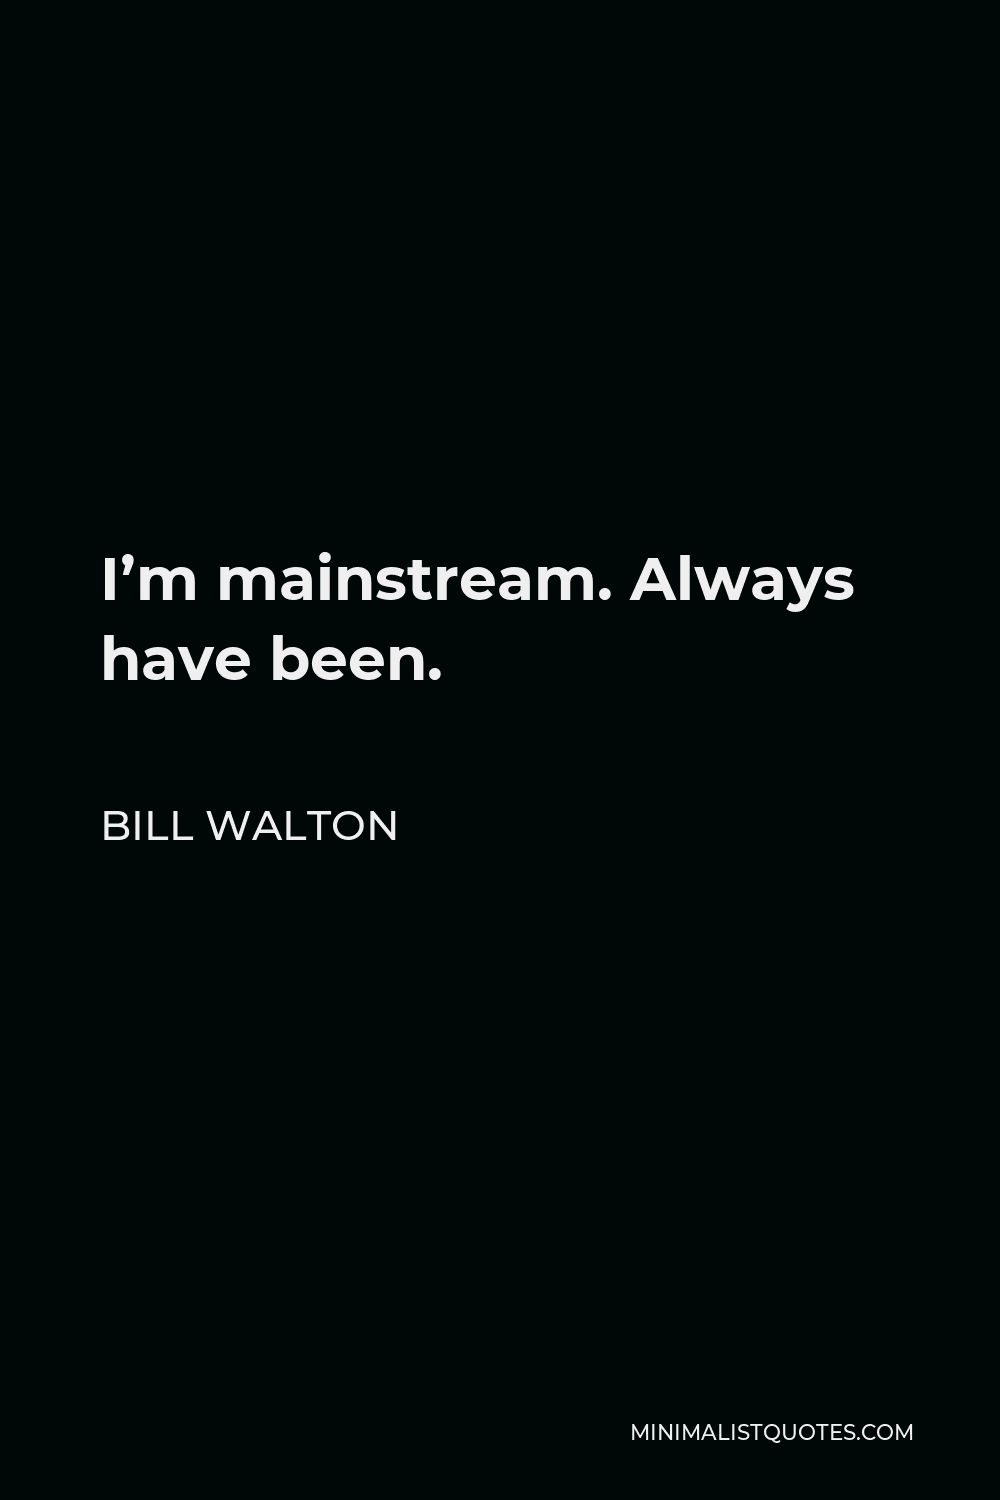 Bill Walton Quote - I’m mainstream. Always have been.